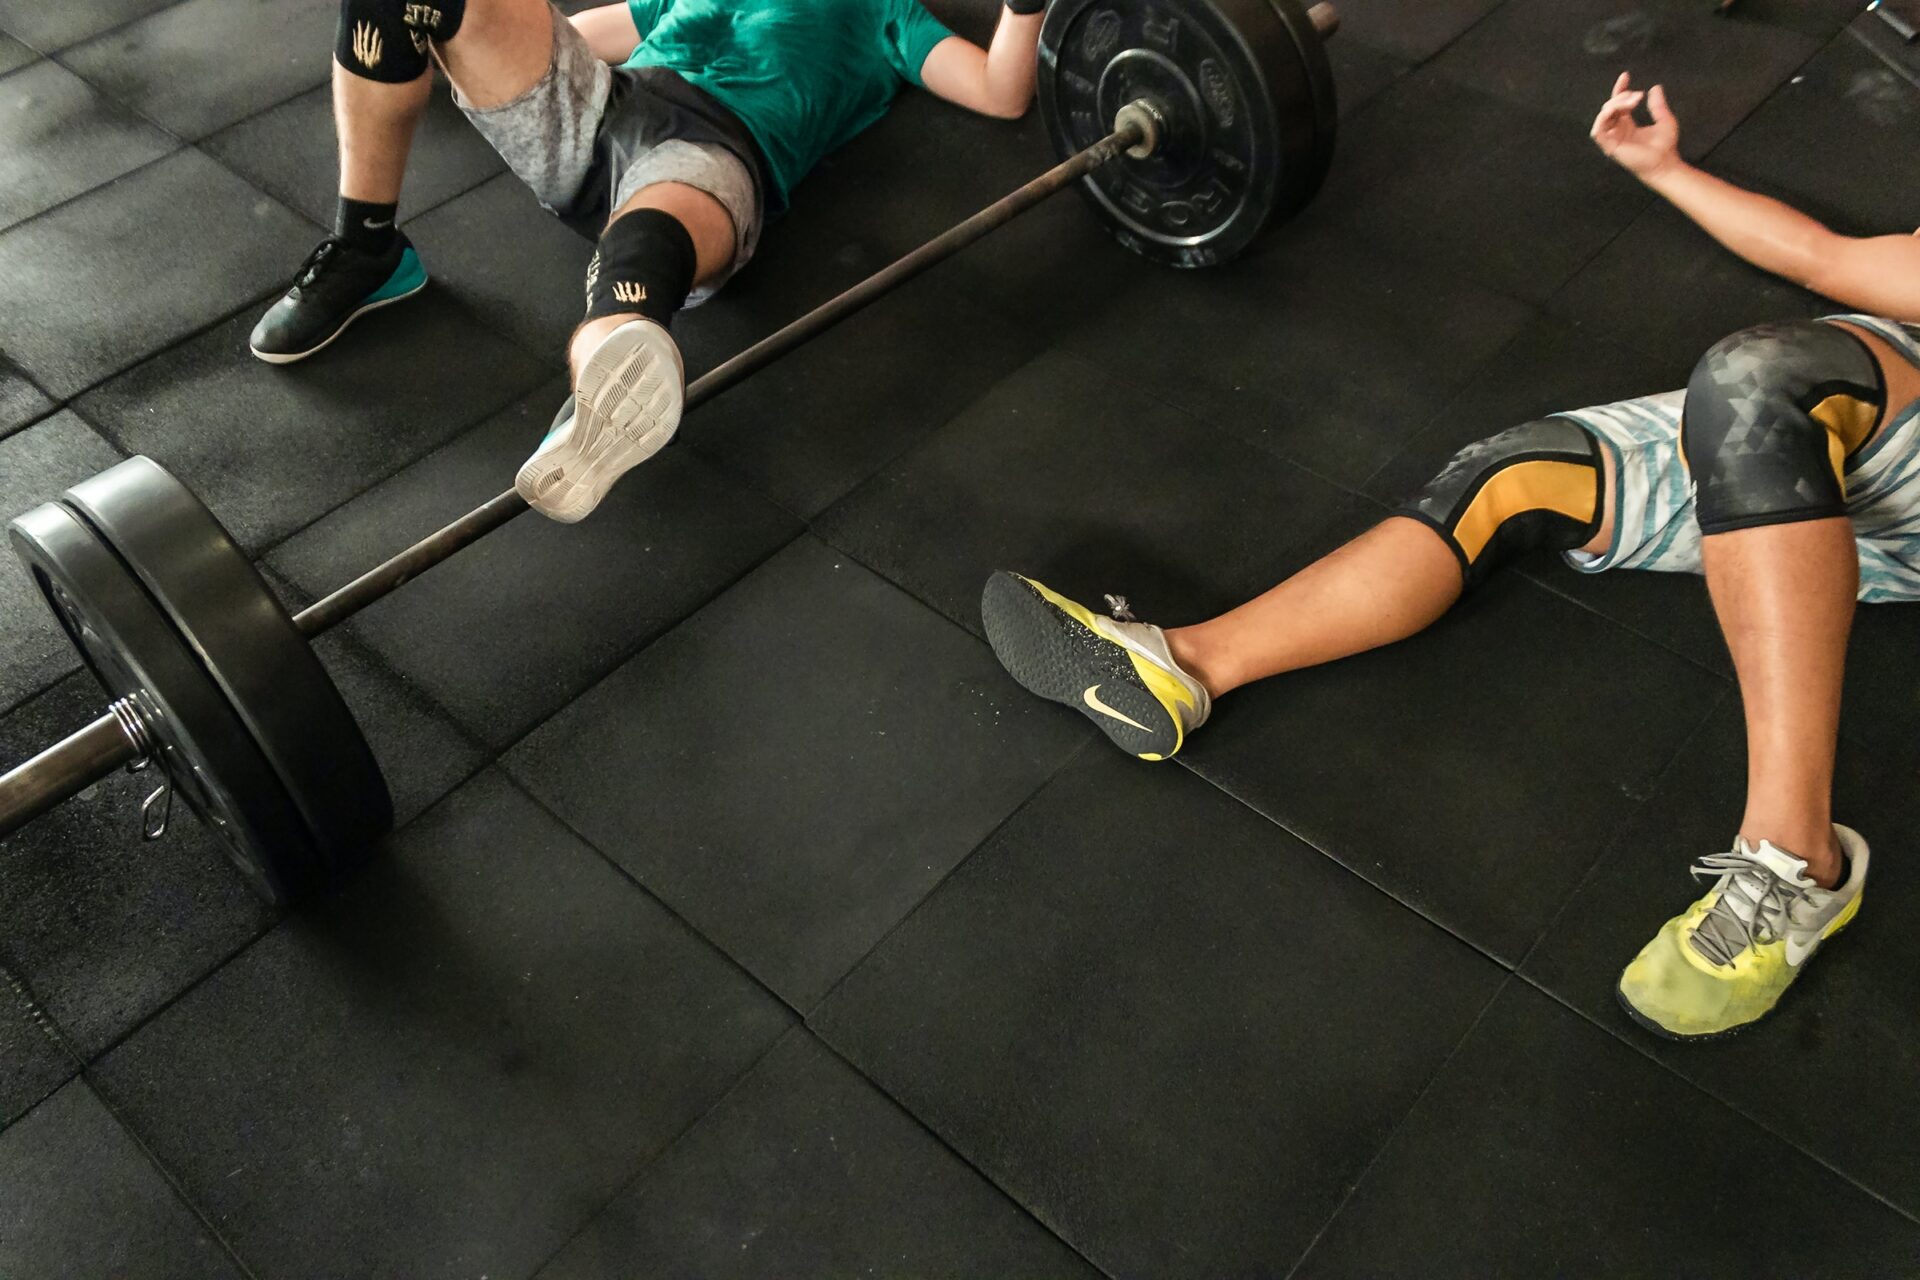 Exhausted athletes laying on a gym floor with a weighted barbell